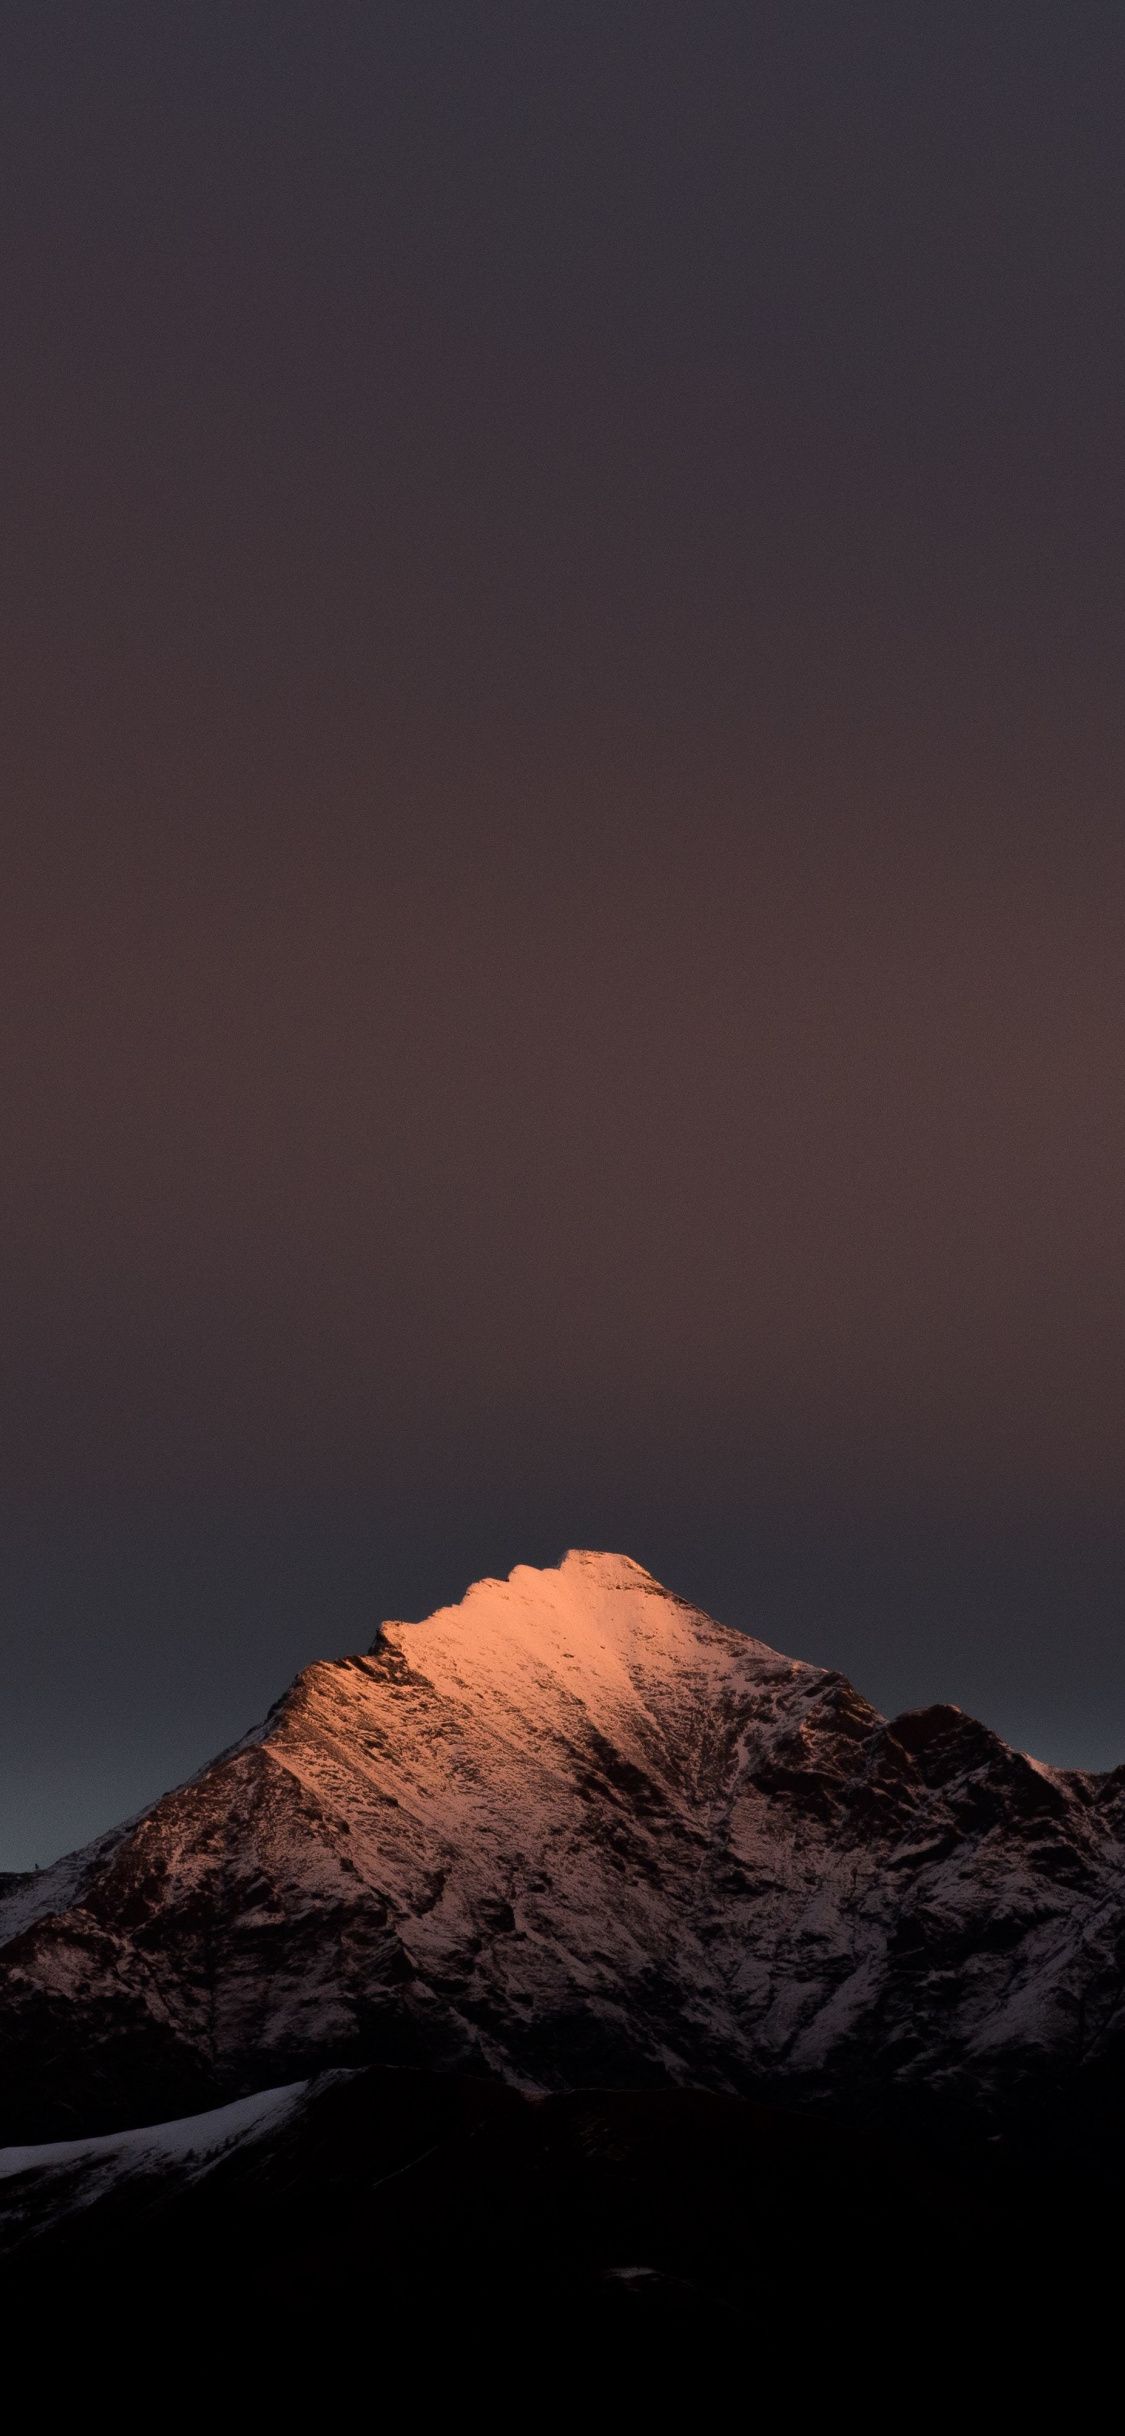 Evening clean sky mountains peak nature x wallpaper nature iphone wallpaper iphone wallpaper landscape oneplus wallpapers